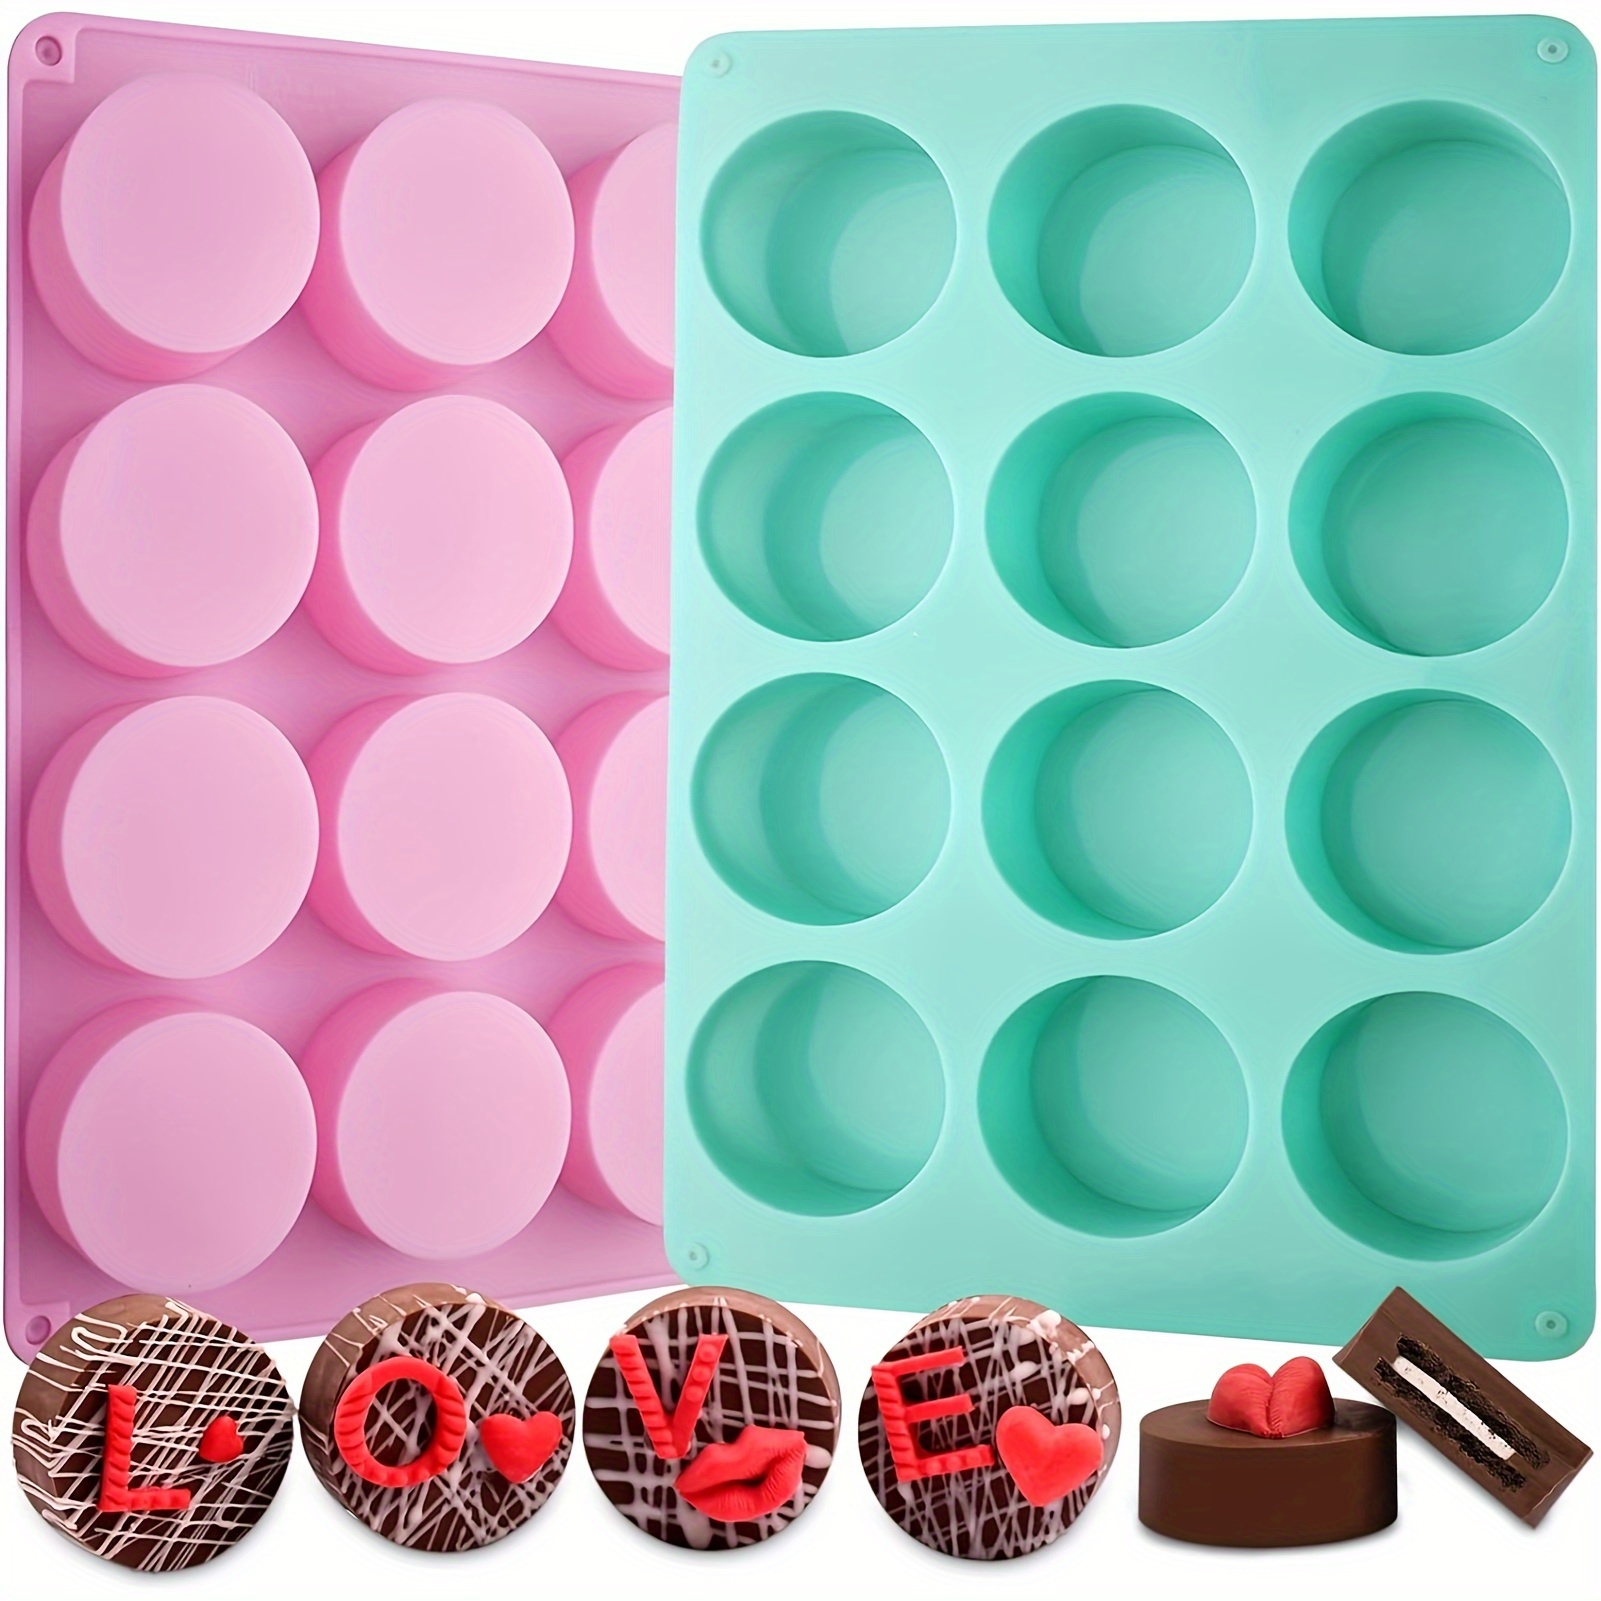 3Pcs Silicone Mold for Oreo Cookie Chocolate, 12-Cavity Round